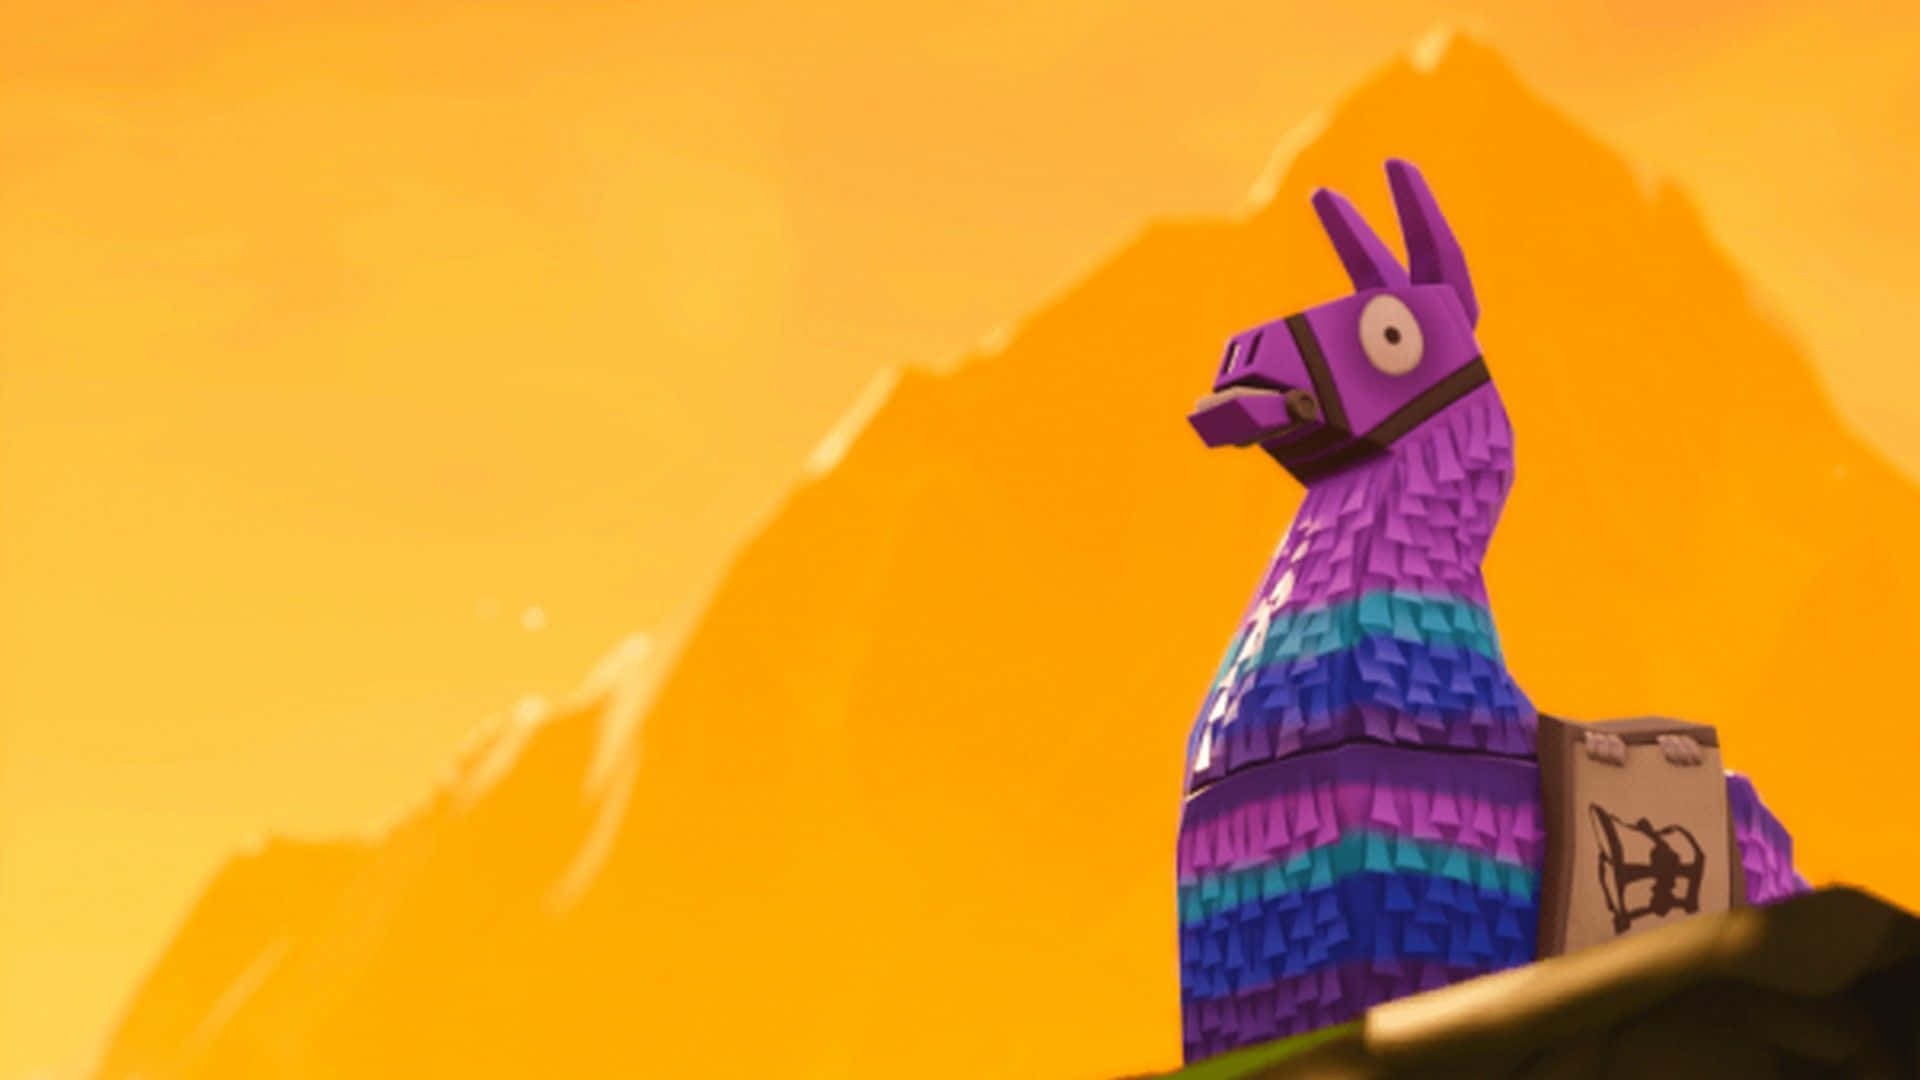 Dive into the world of Fortnite with this cute wallpaper Wallpaper